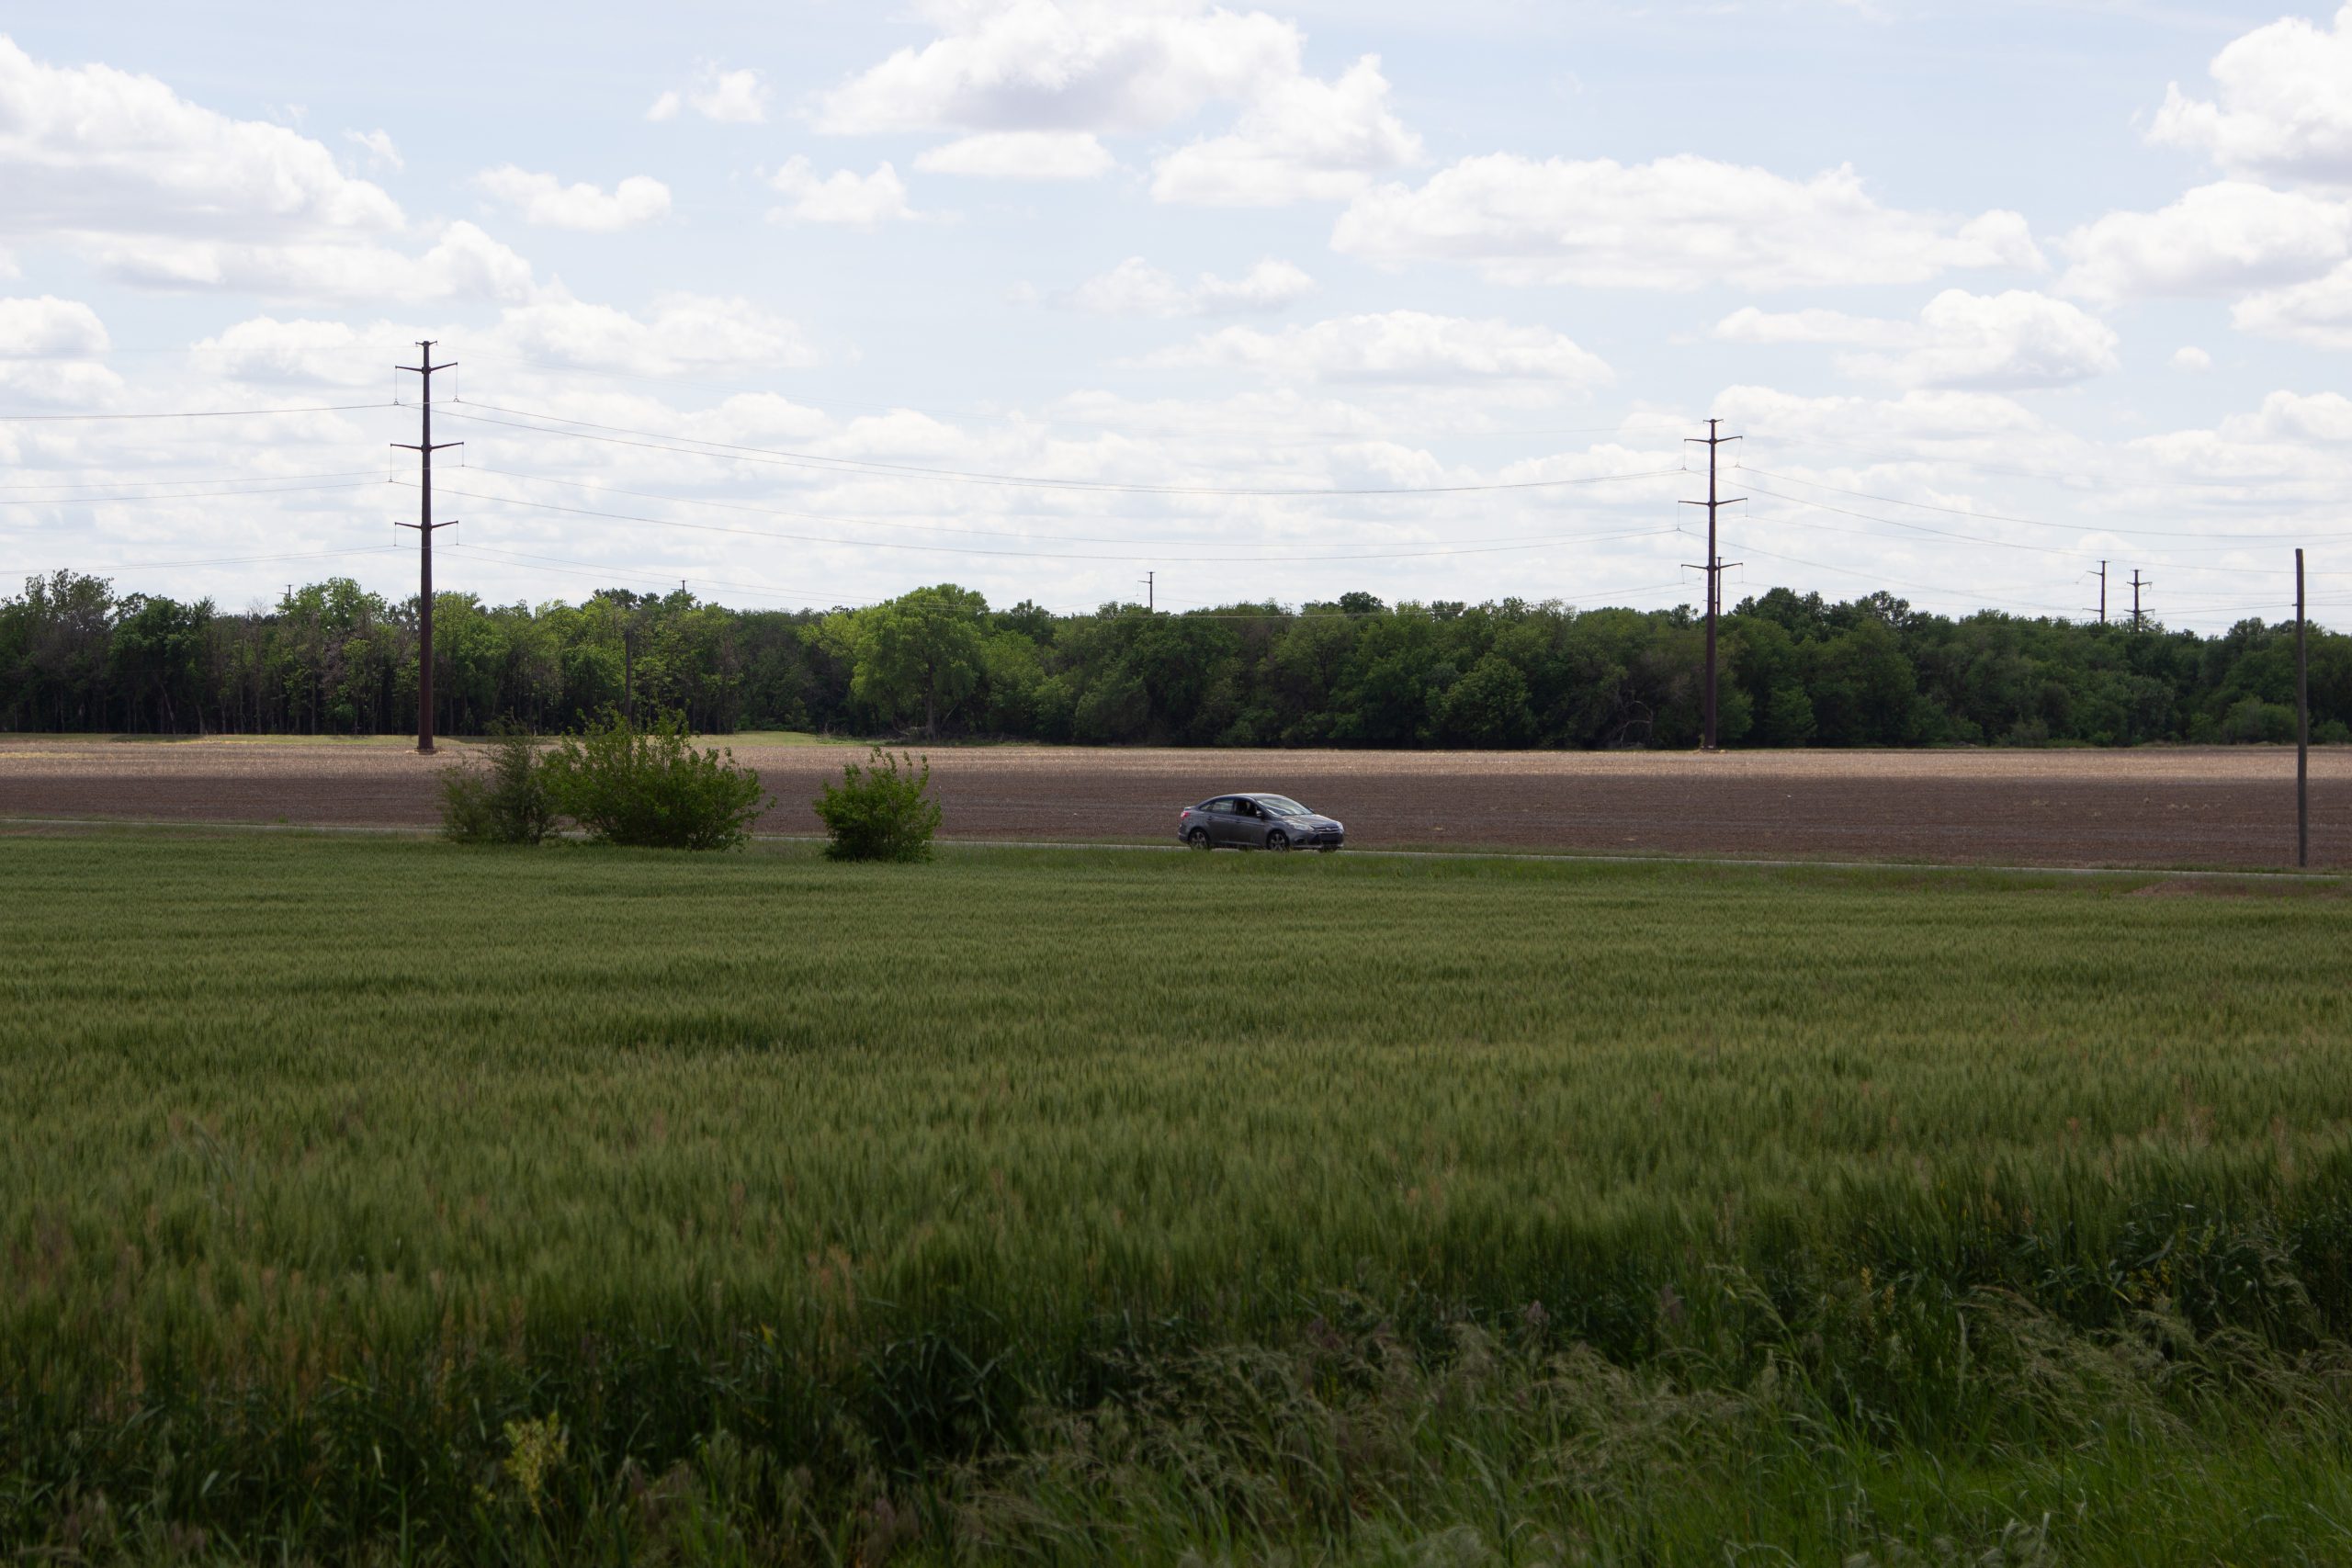 A traveler goes past a wheat field east of Hutchinson, Kansas. (Journal photo by Dave Bergmeier.)